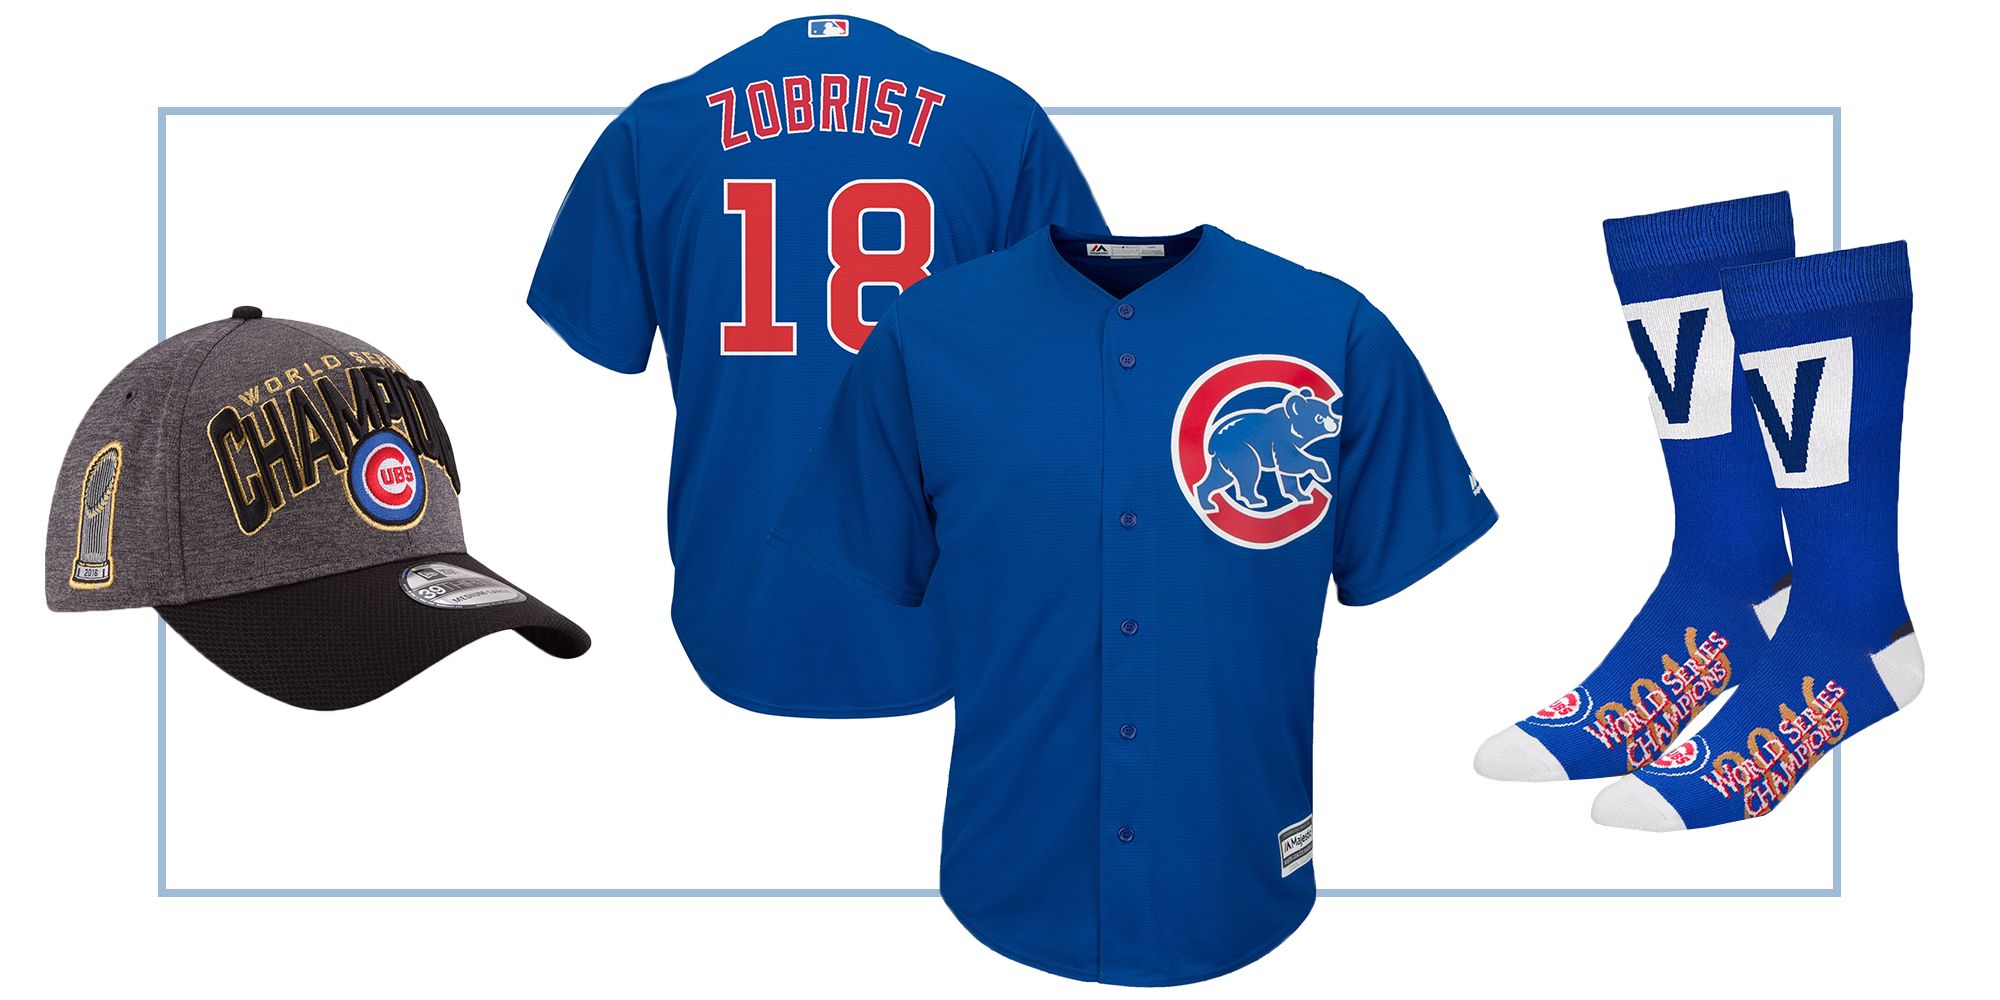 chicago cubs 1908 jersey